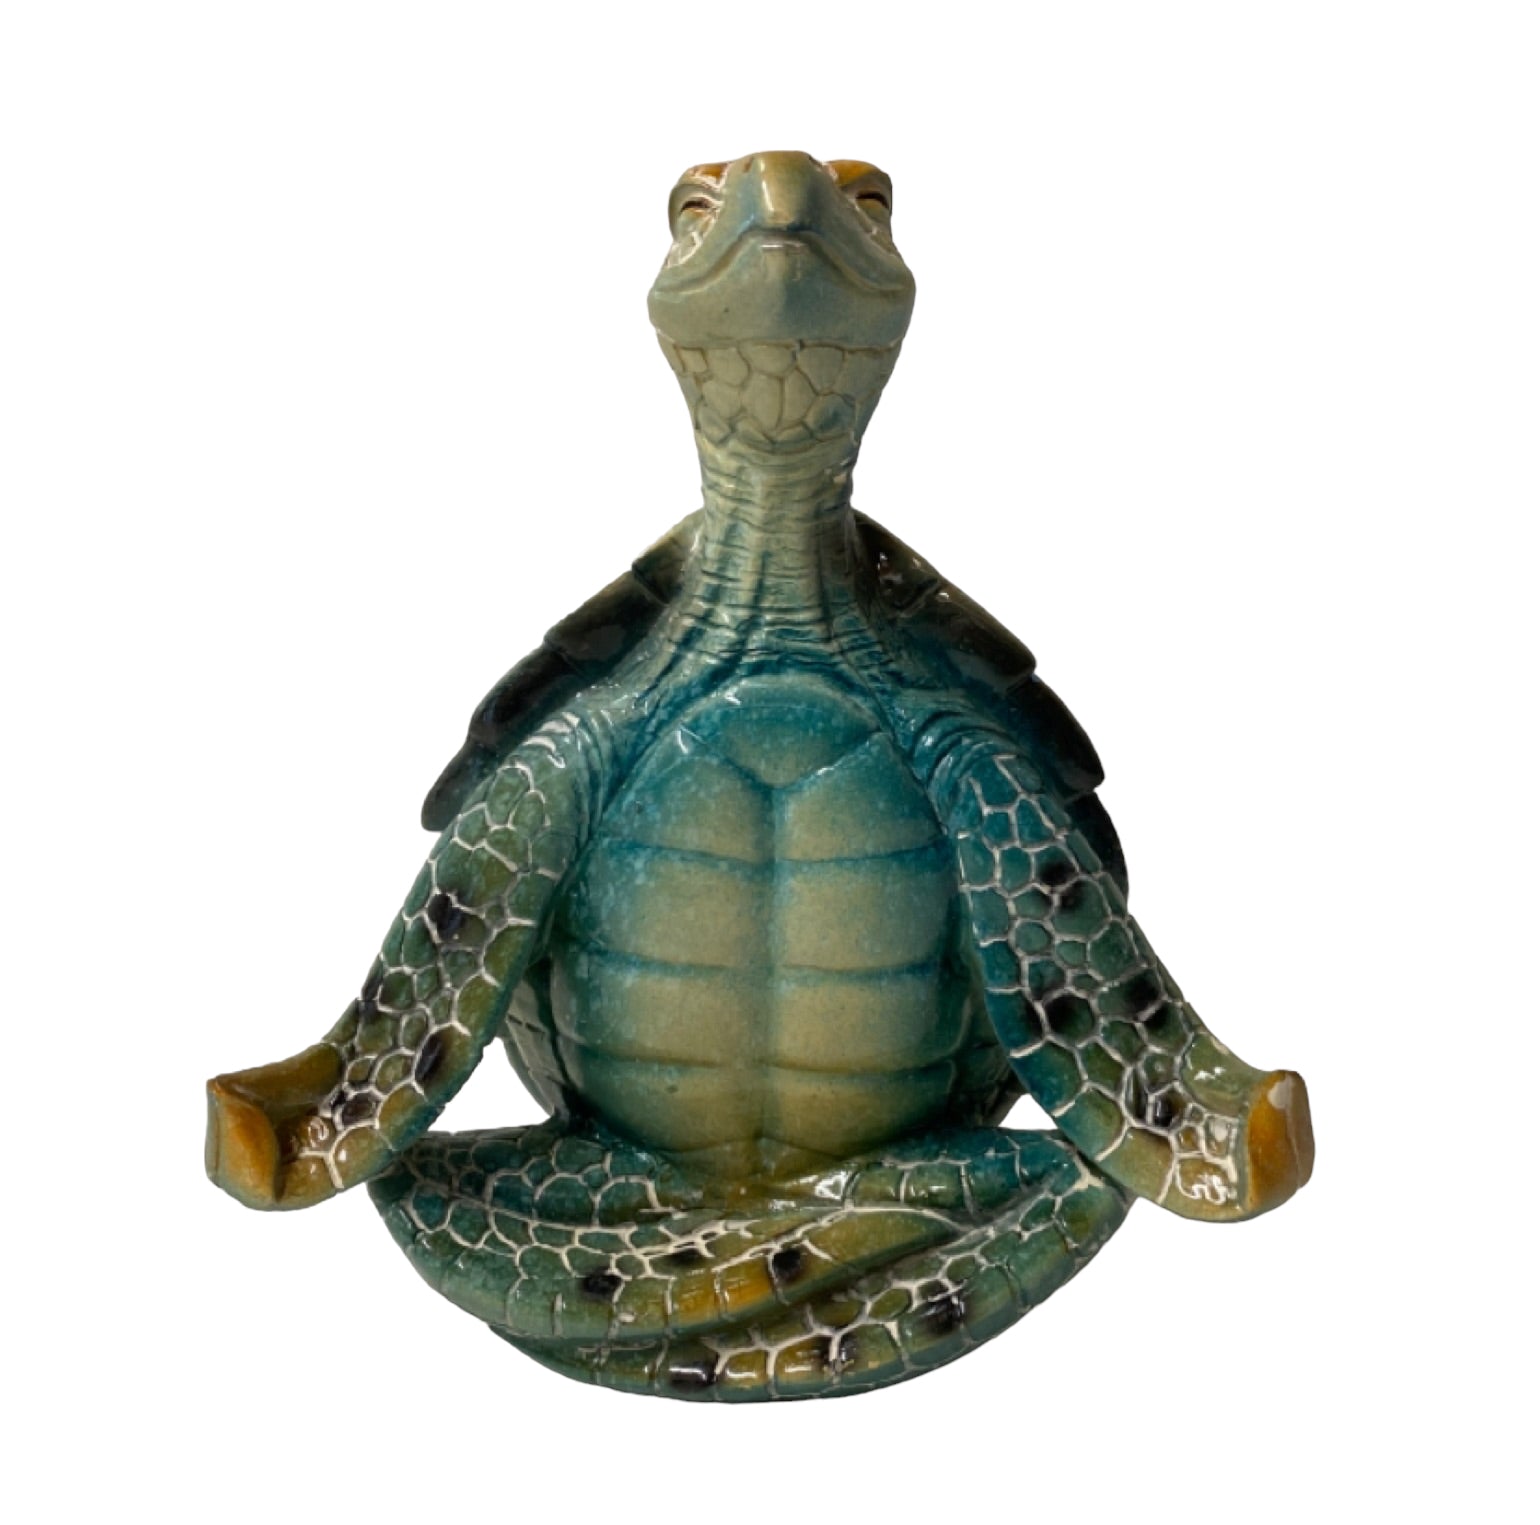 Turtle Meditating Zen Beach House Ornament - The Renmy Store Homewares & Gifts 